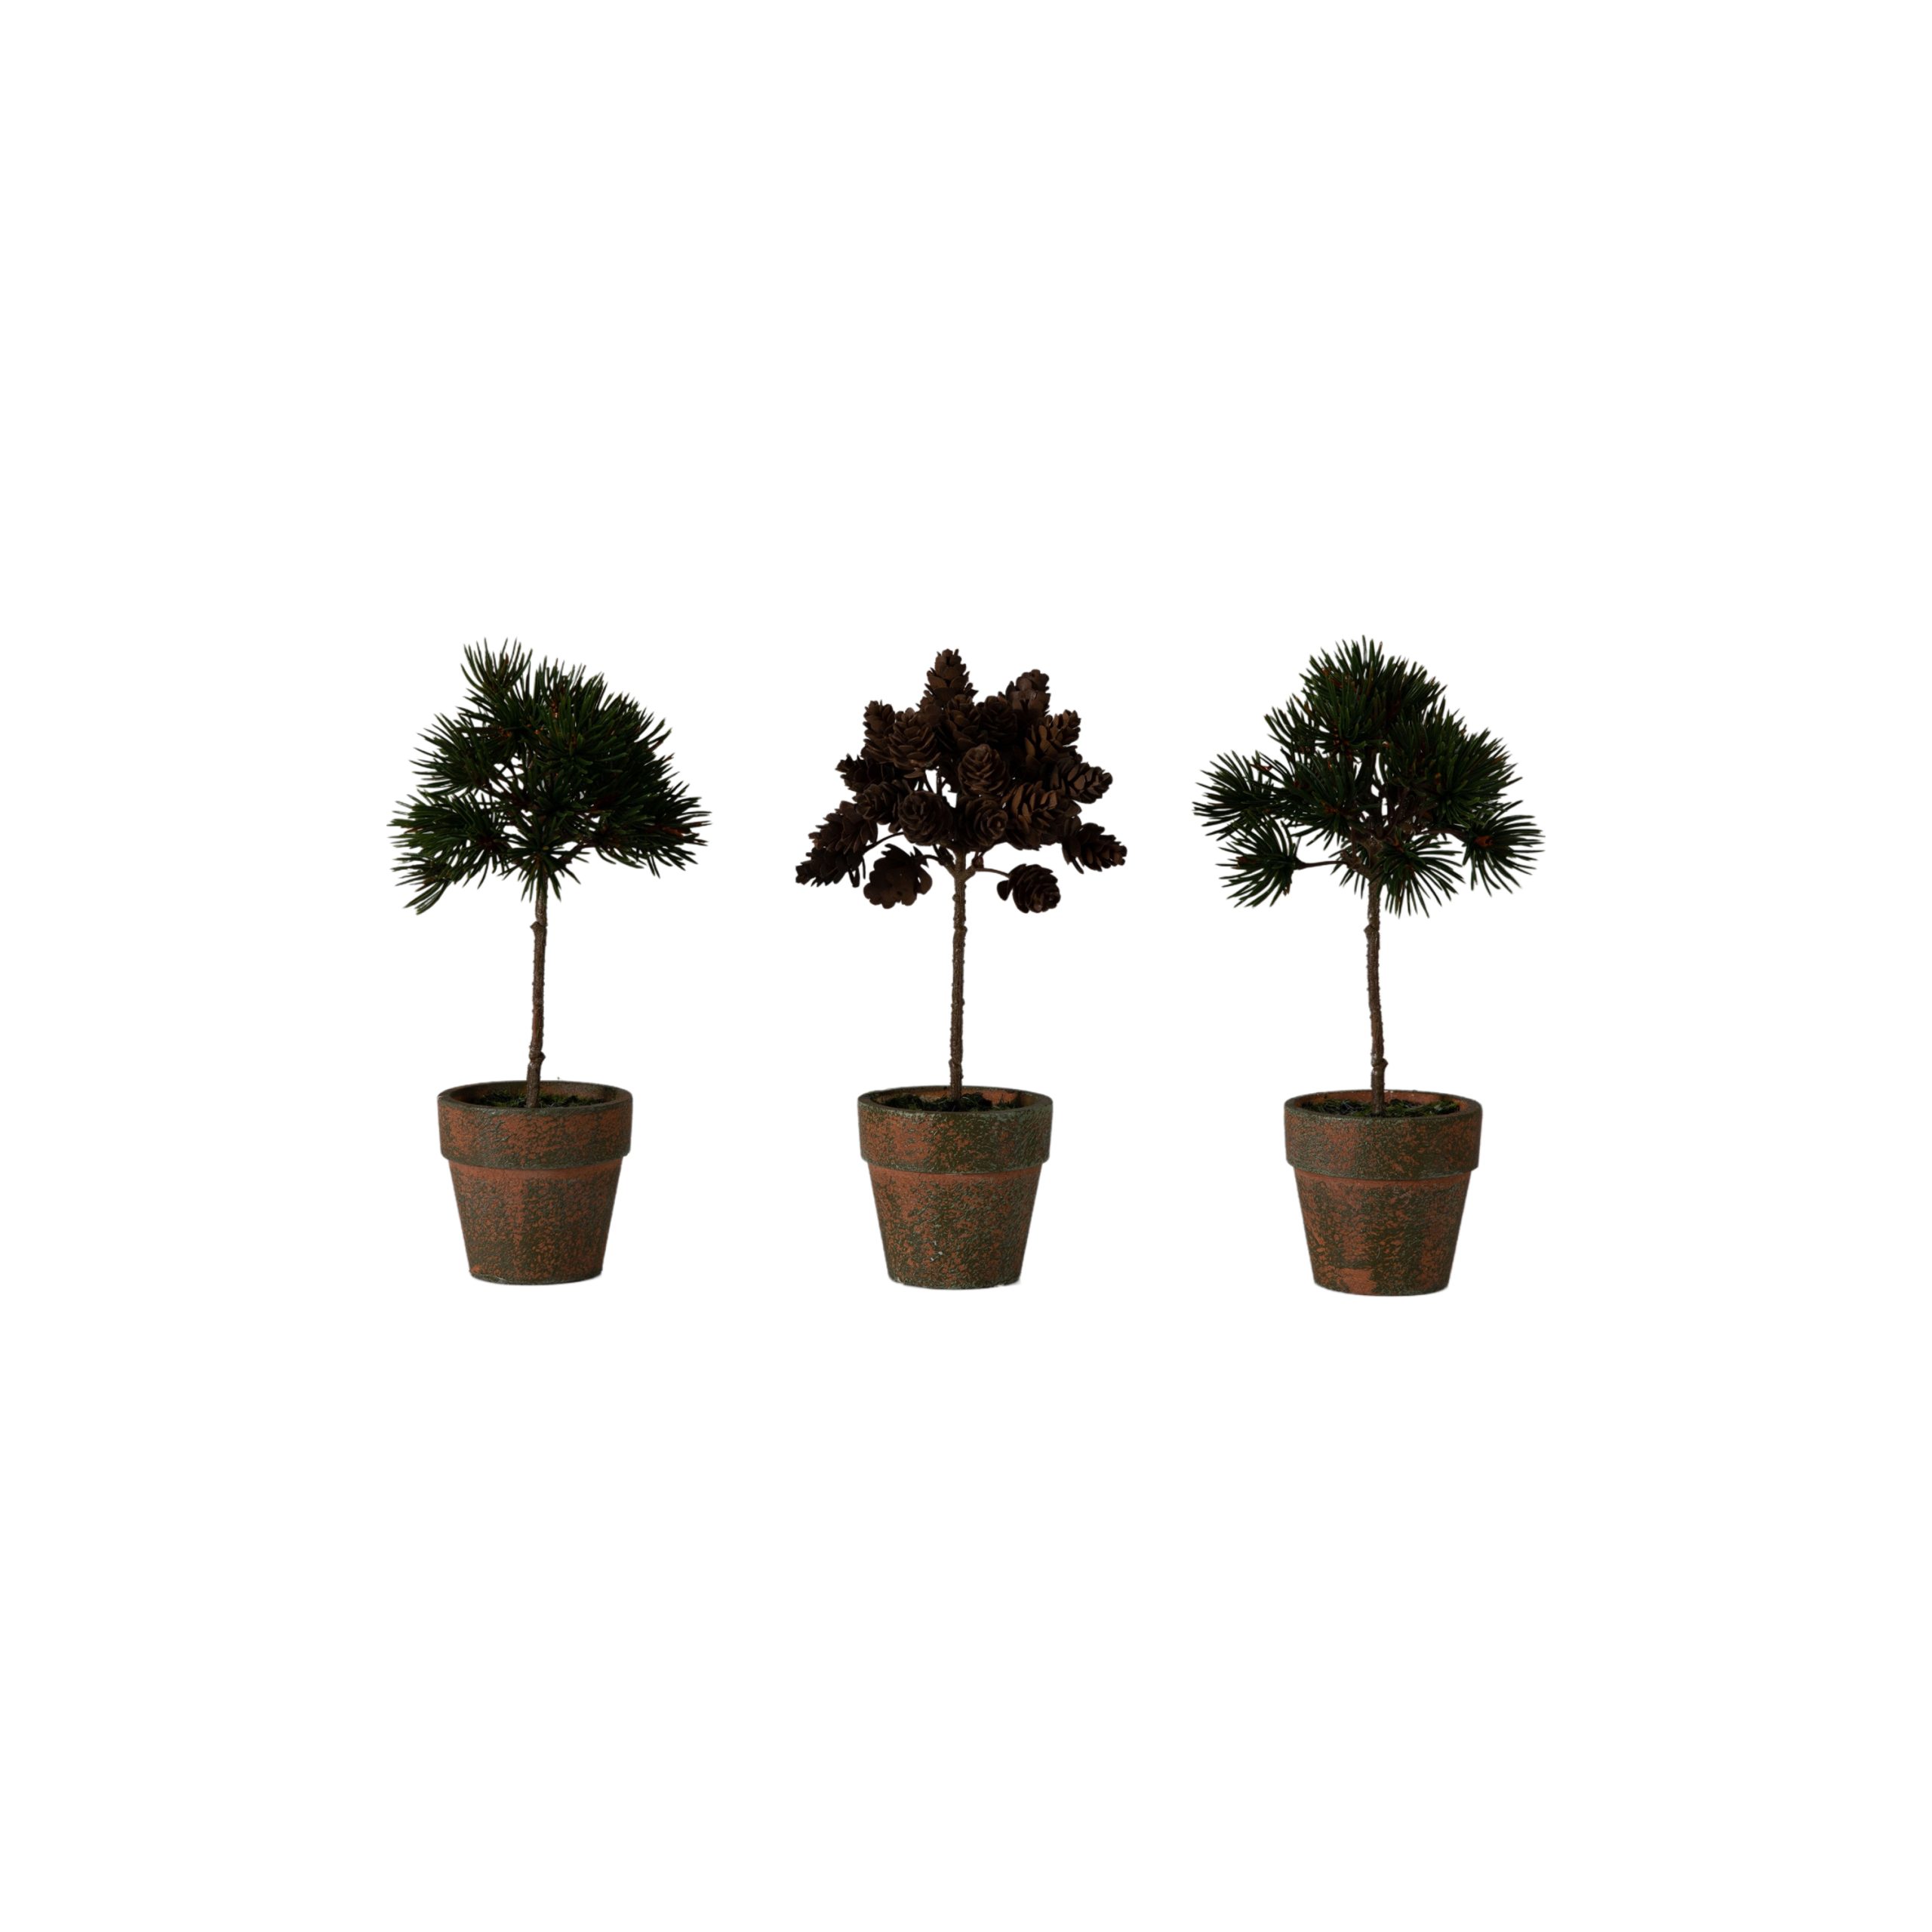 Gallery Direct Potted Pine/Cone Trees (Set of 3)